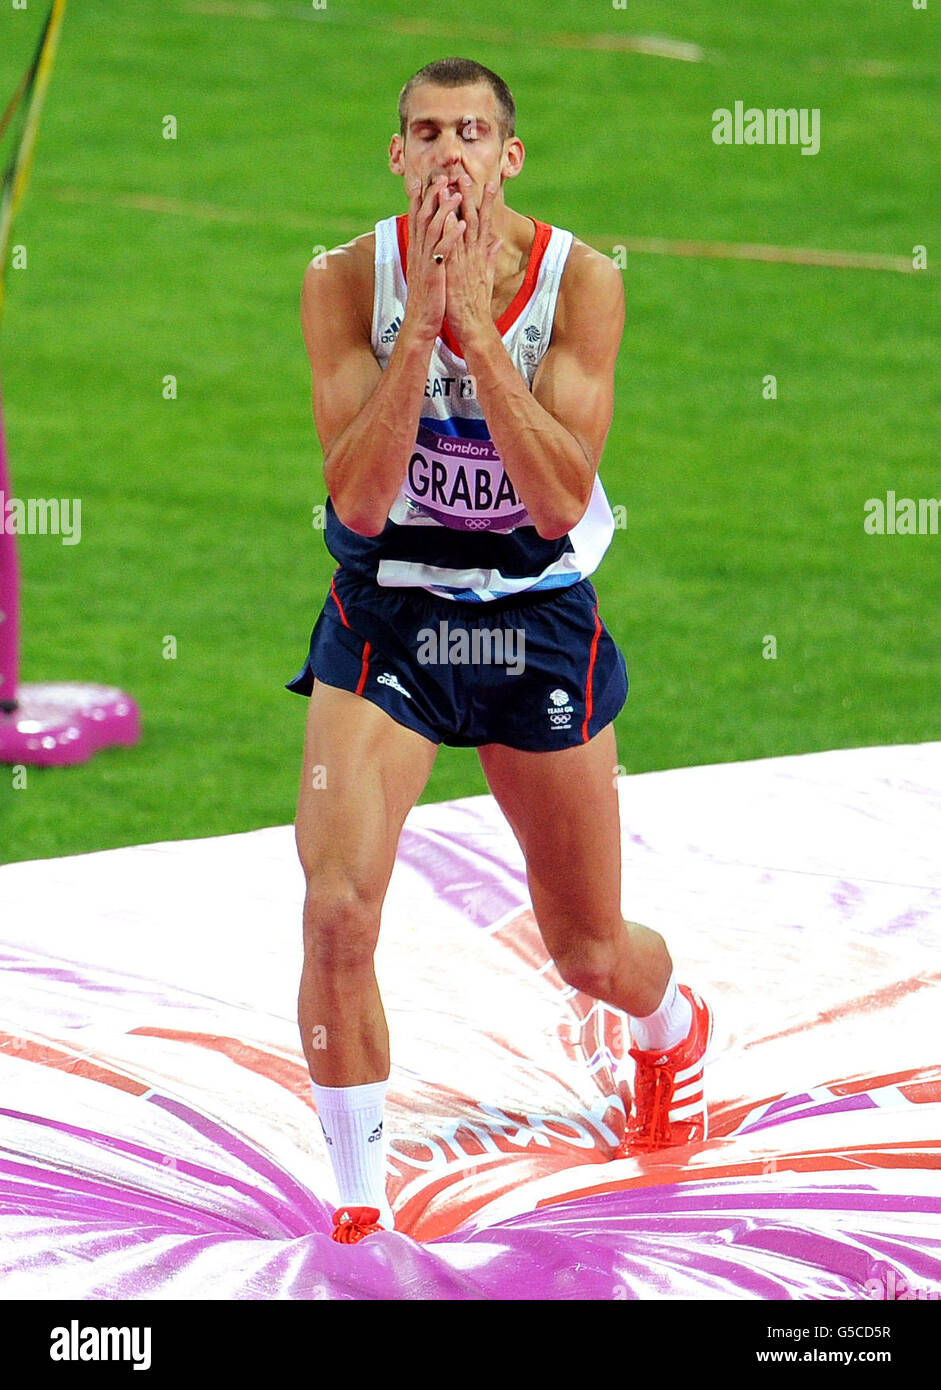 London Olympic Games - Day 11. Great Britains Robert Grabarz fails at 2.33 jump in the mens high jump at the Olympic Stadium, London. Stock Photo